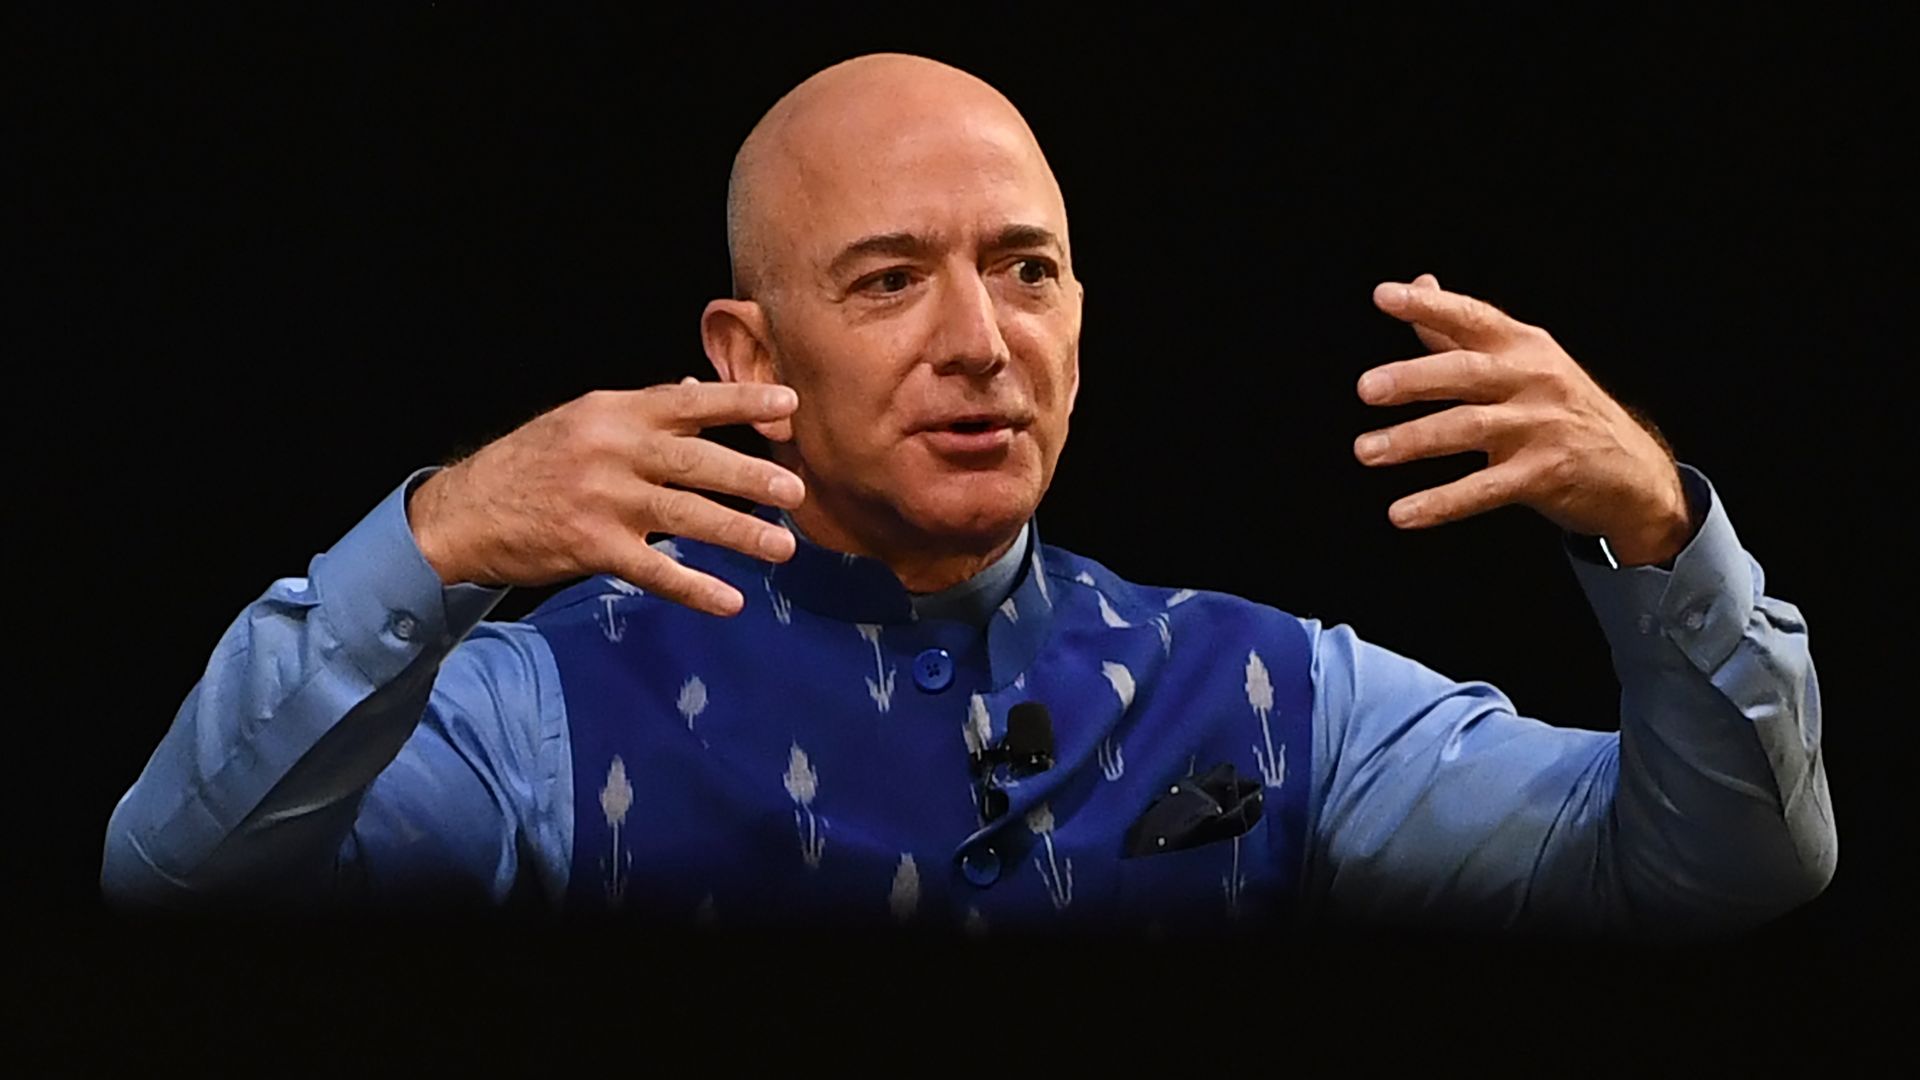 In this image, Bezos sits on stage with his hands in front of his face